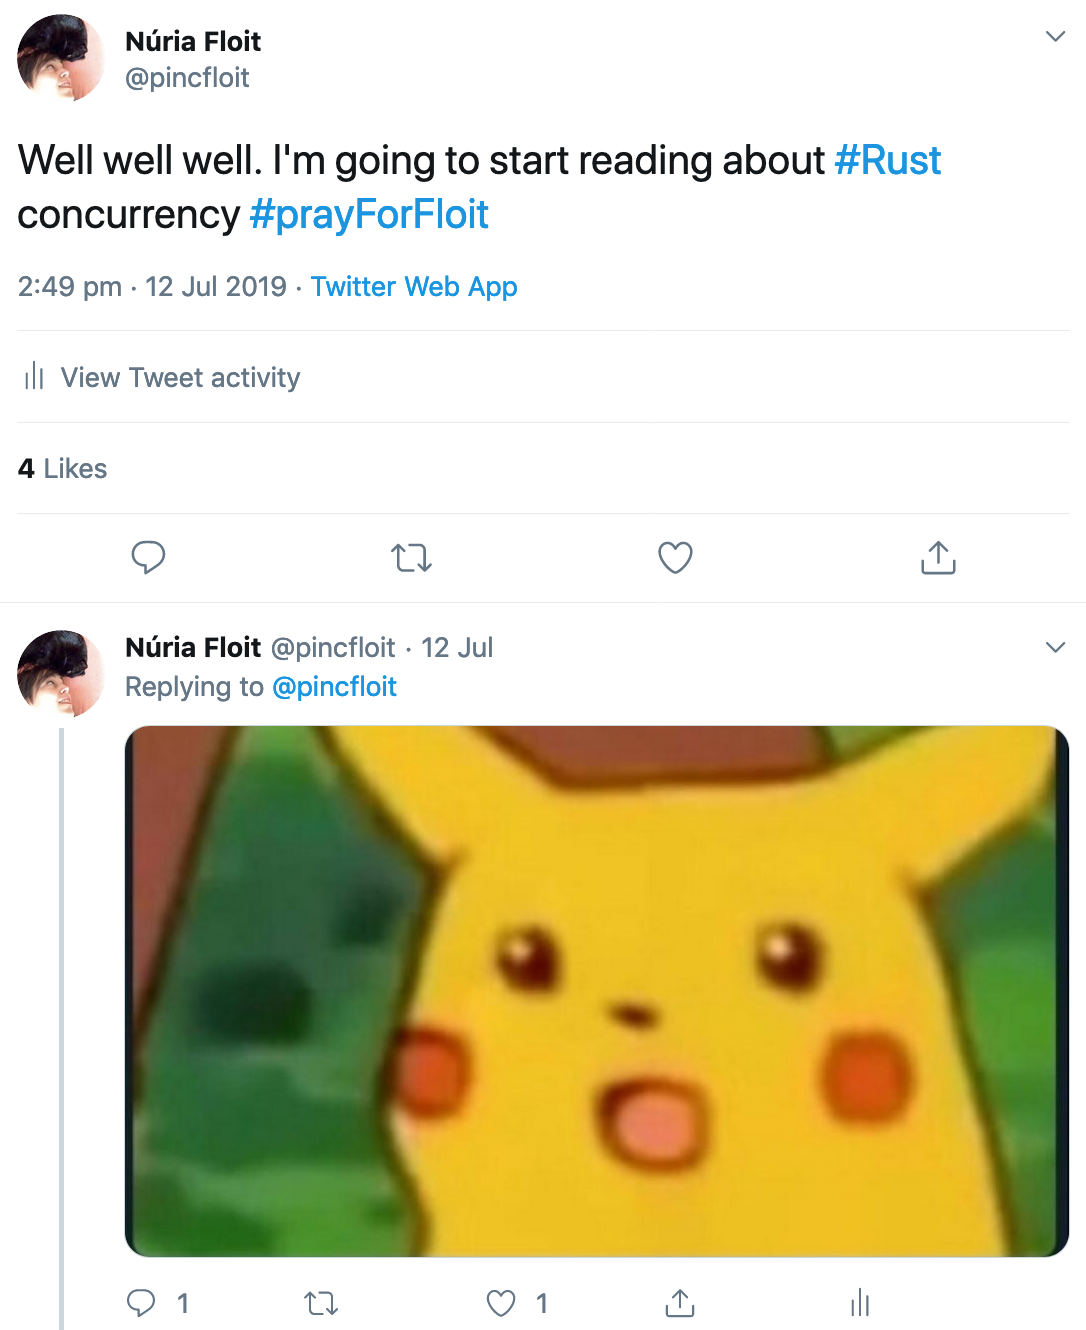 Tweet saying 'Well well well. Im going to start reading about #Rust concurrency #prayForFloit', followed by a tweet of a picture of Pikachu with a blank face